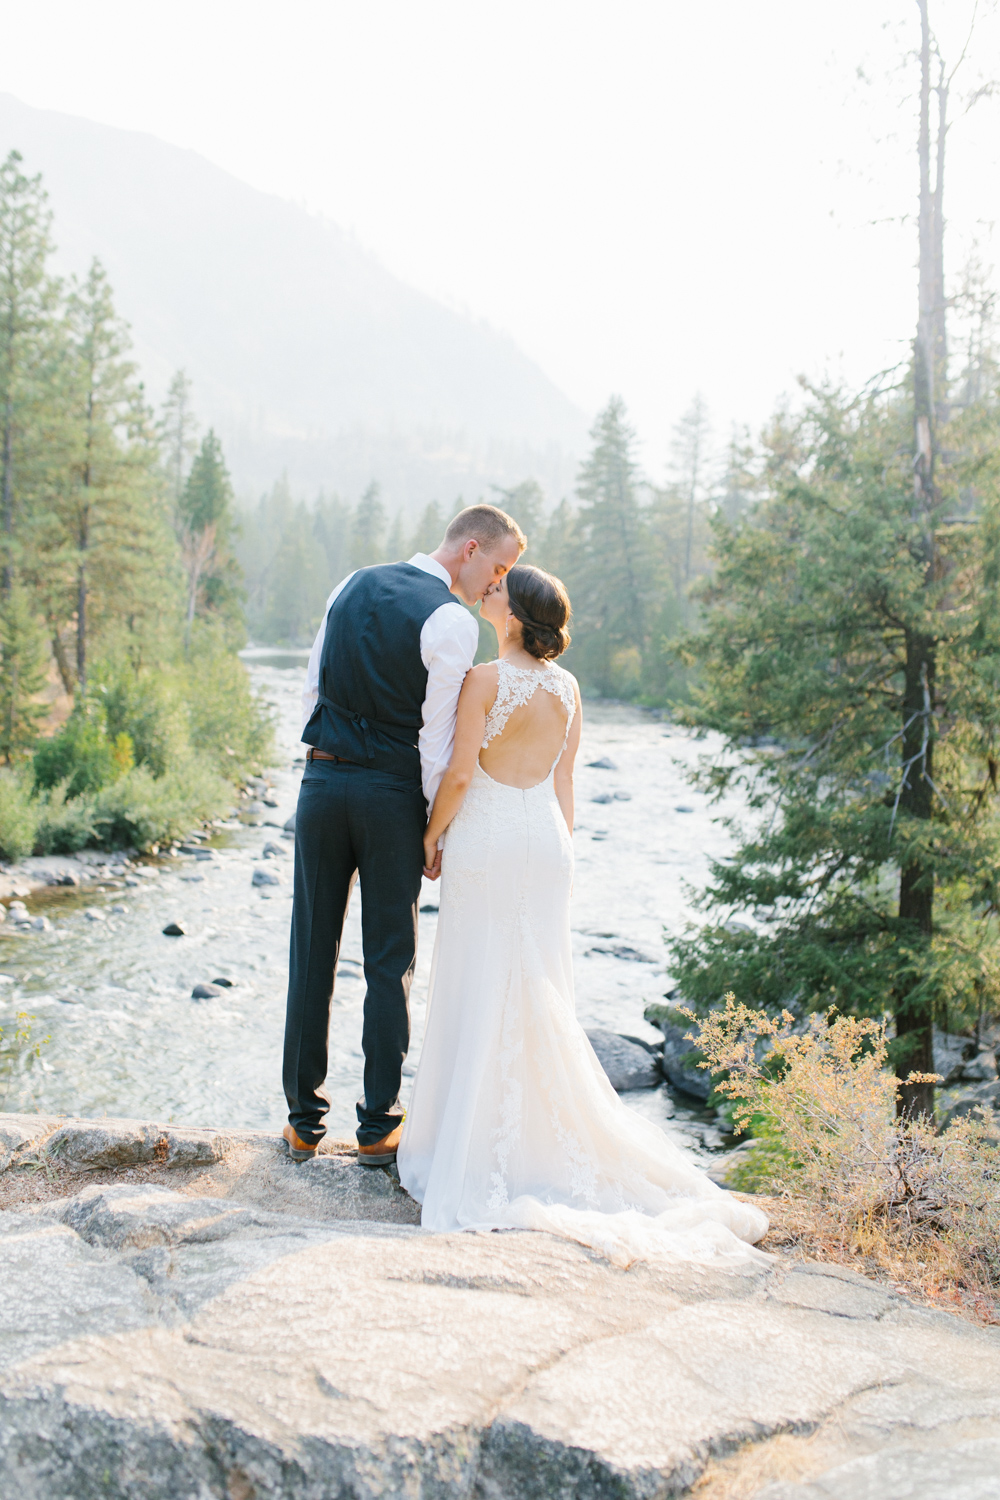 Grey and White Wedding in the Mountains of Leavenworth, Washington | Sleeping Lady | Classic and Timeless Wedding | VSCO | Stunning Mountain Top Bride and Groom Portraits on the Icicle River.jpg-3339.jpg